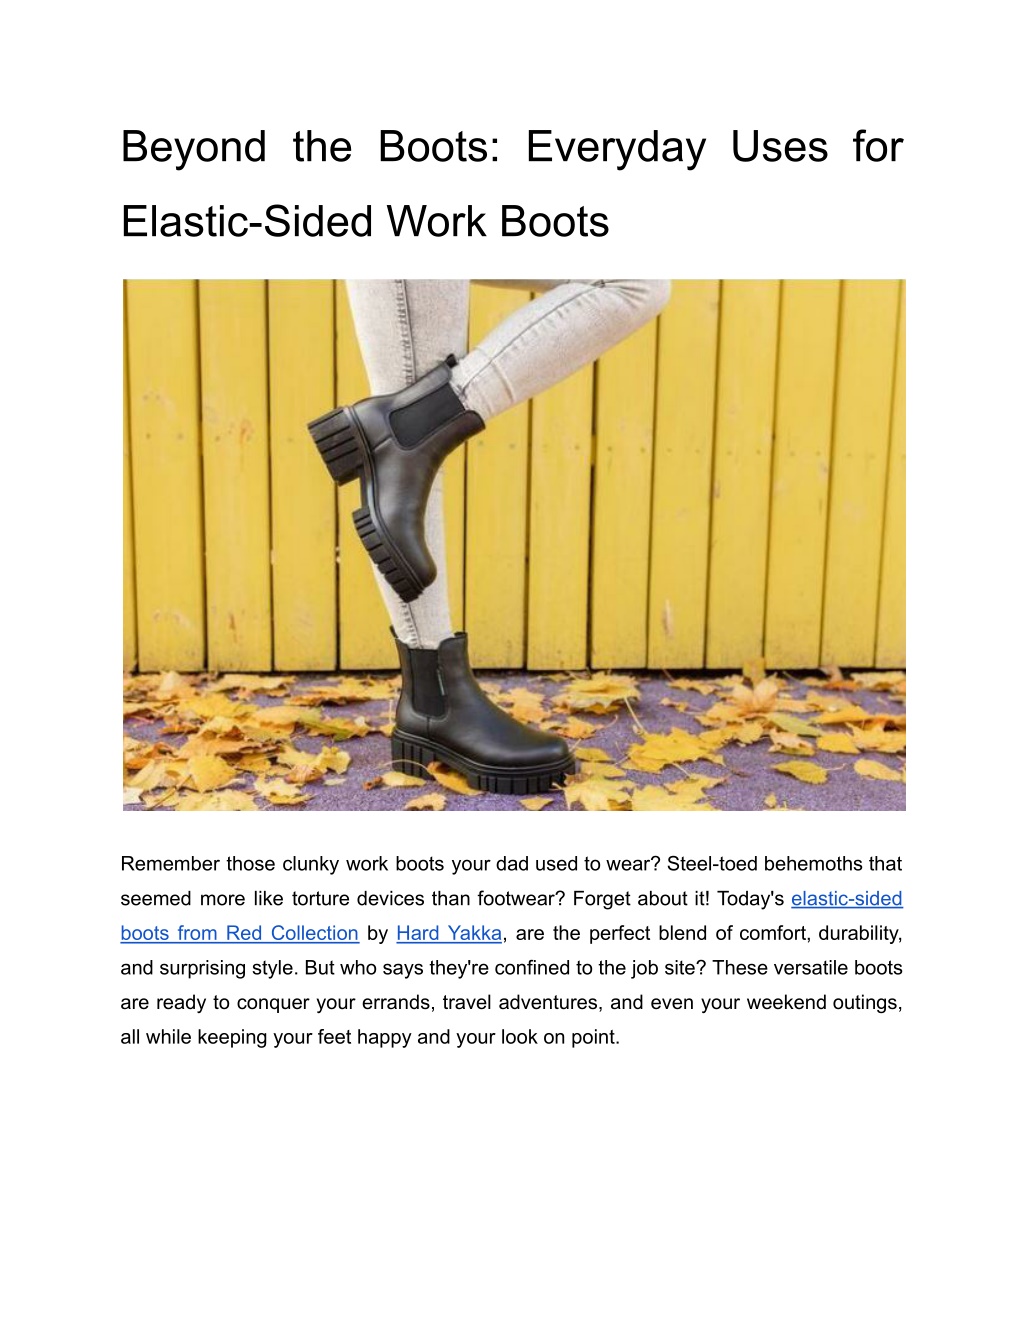 PPT - Beyond the Boots: Everyday Uses for Elastic-Sided Work Boots ...